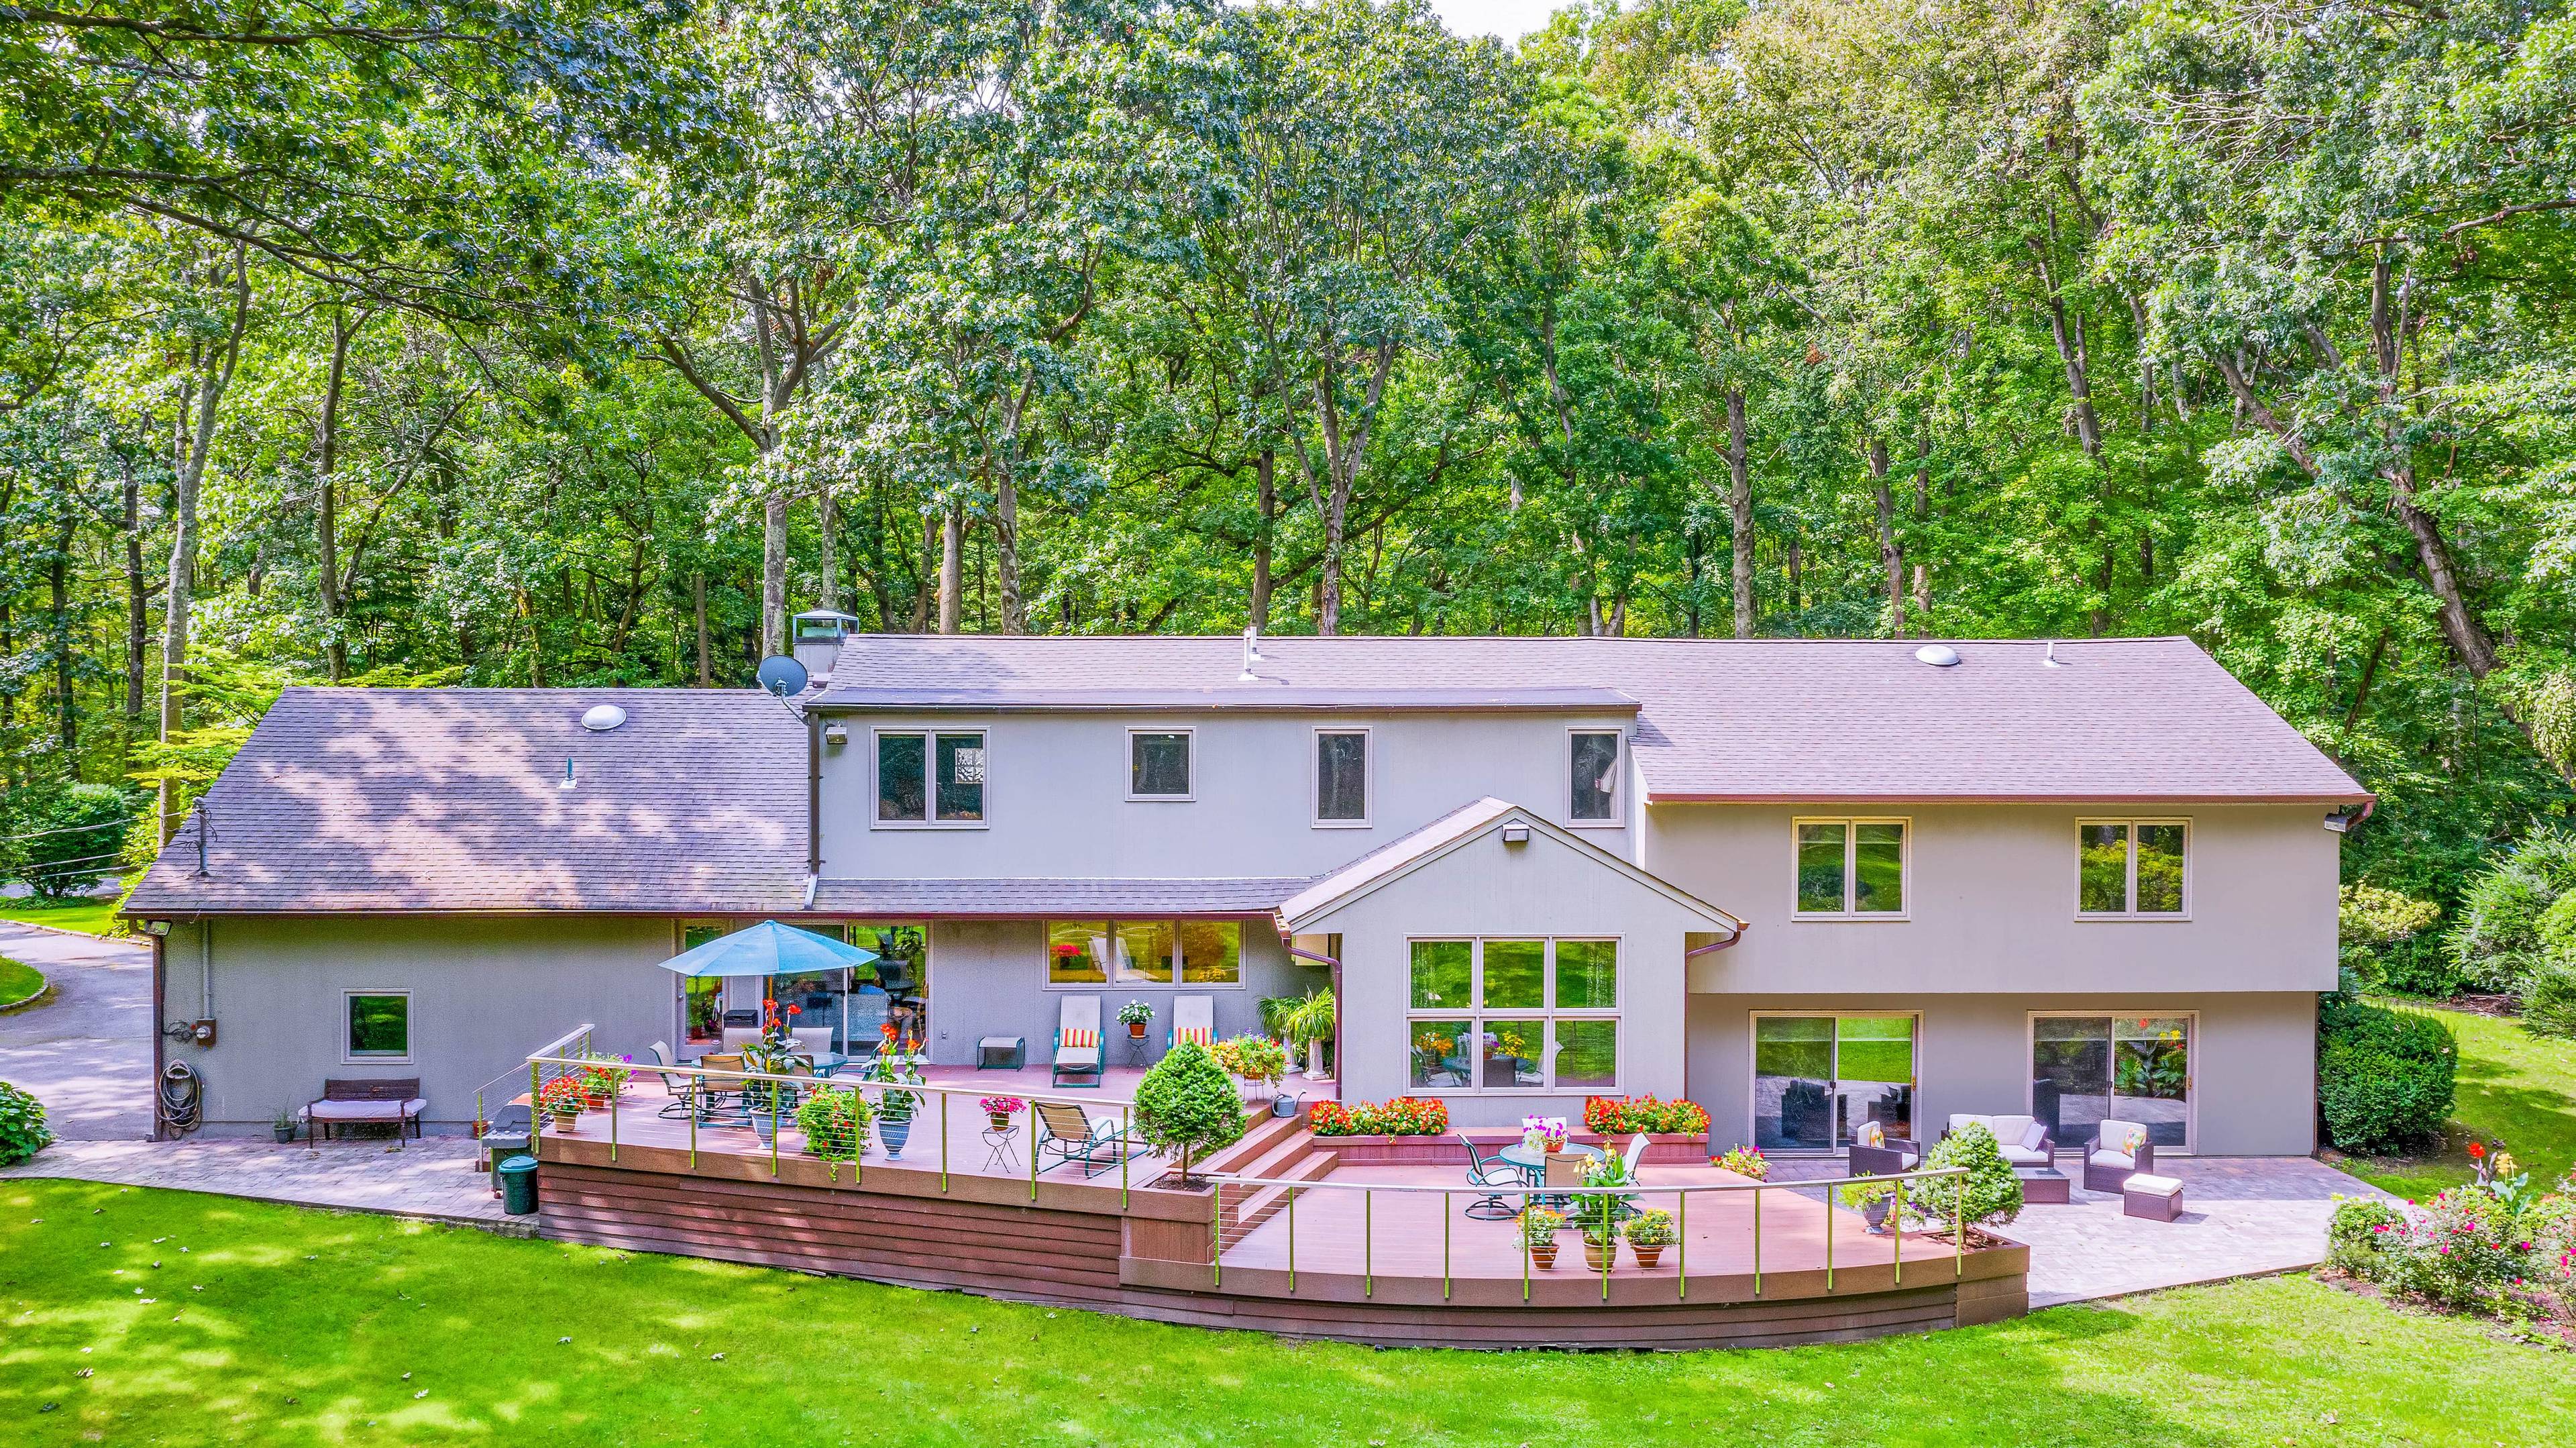 Modern Farm Ranch Home Nestled on 2 Park-Like Acres in Muttontown